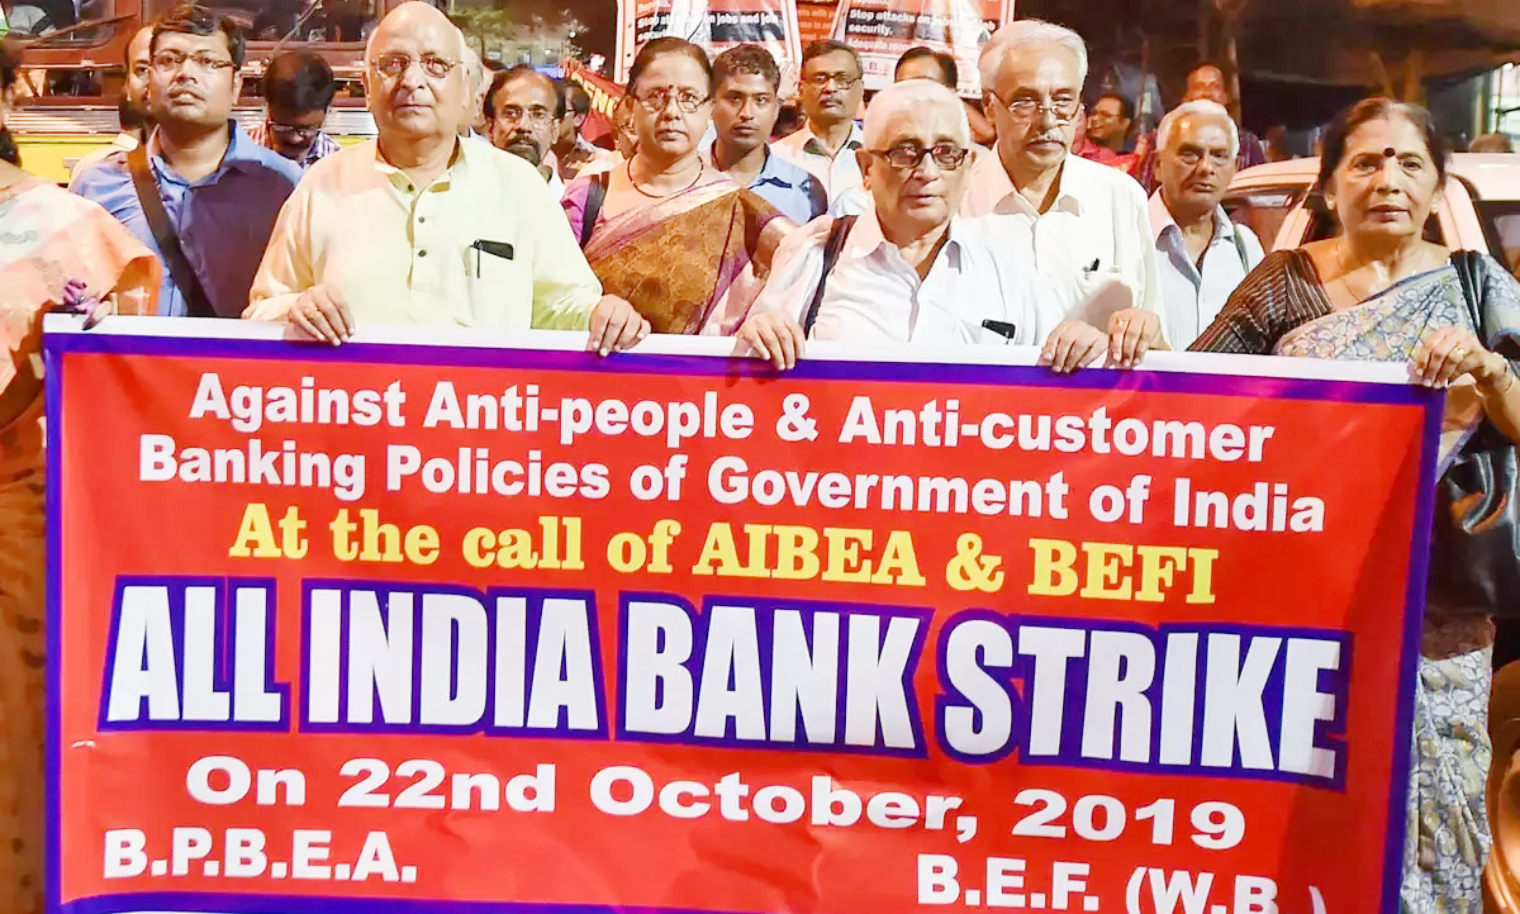 Bank Crisis Spreads in India - Deaths, Strike, Supreme Court Denial